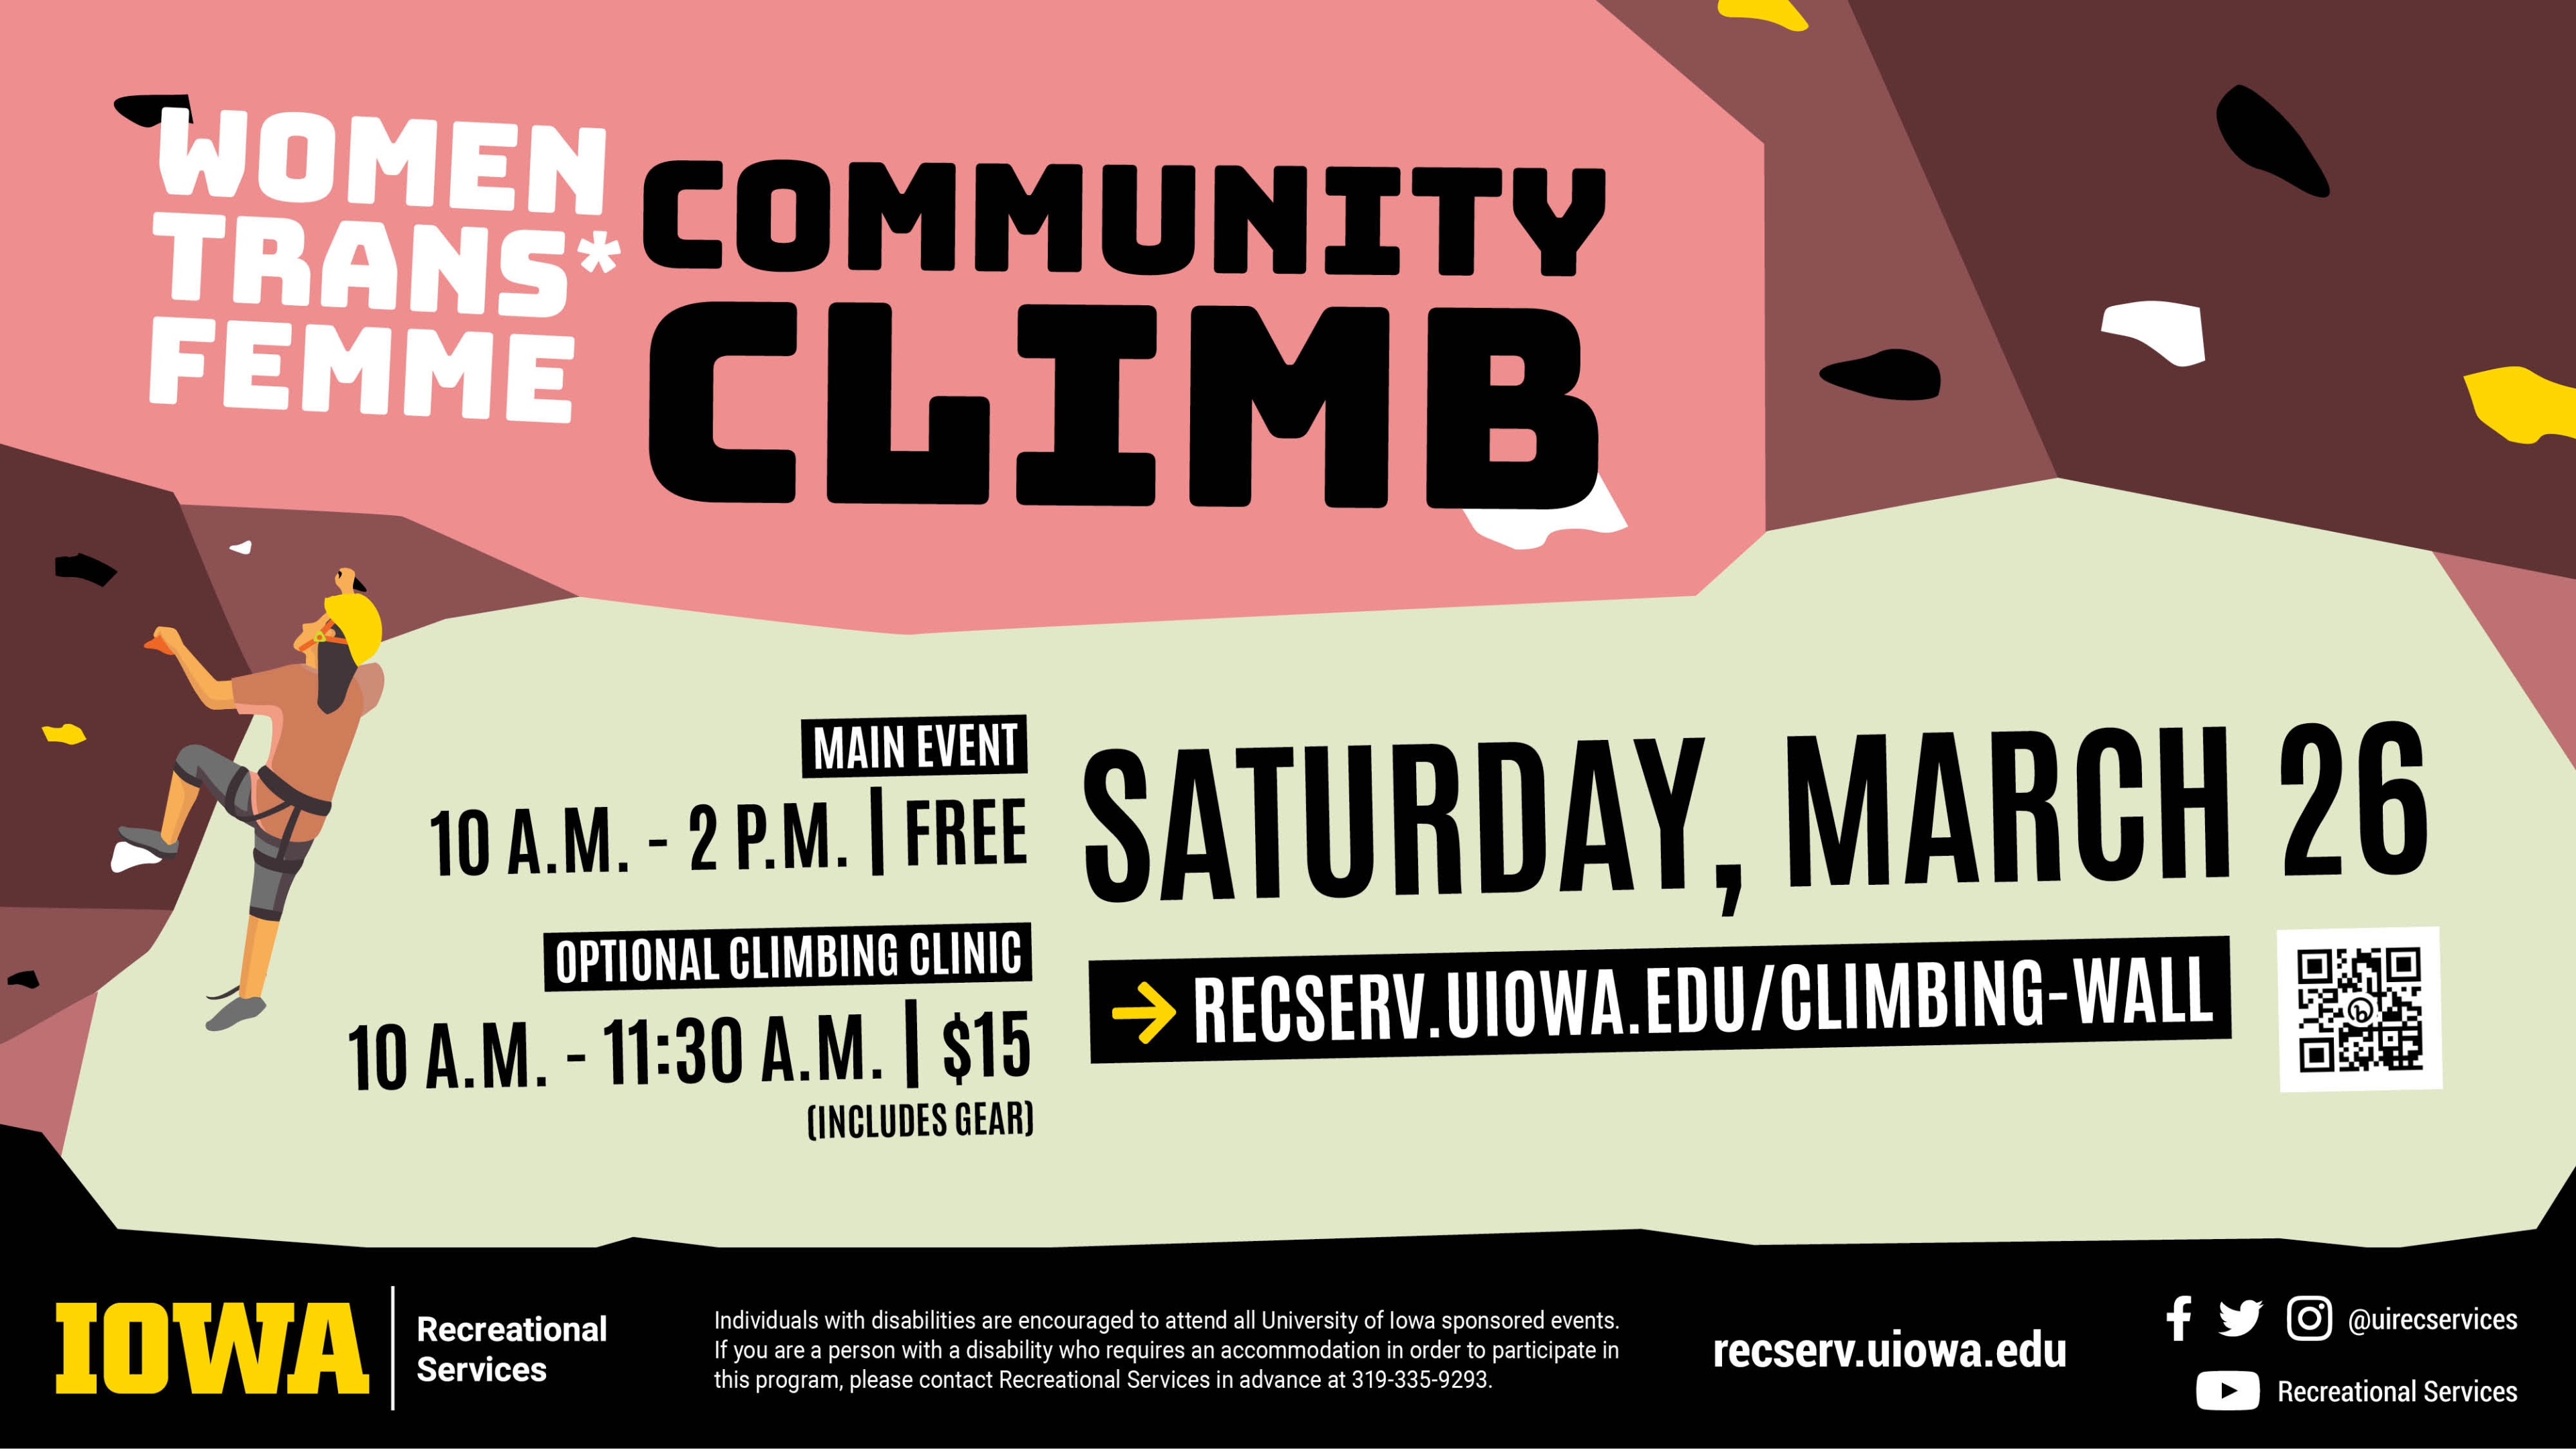 Women Trans Femme Community Climb Saturday, March 26. The main event is free from 10am-2pm and the optional climbing clinic is from 10am-11:30 am for $15 (includes gear).